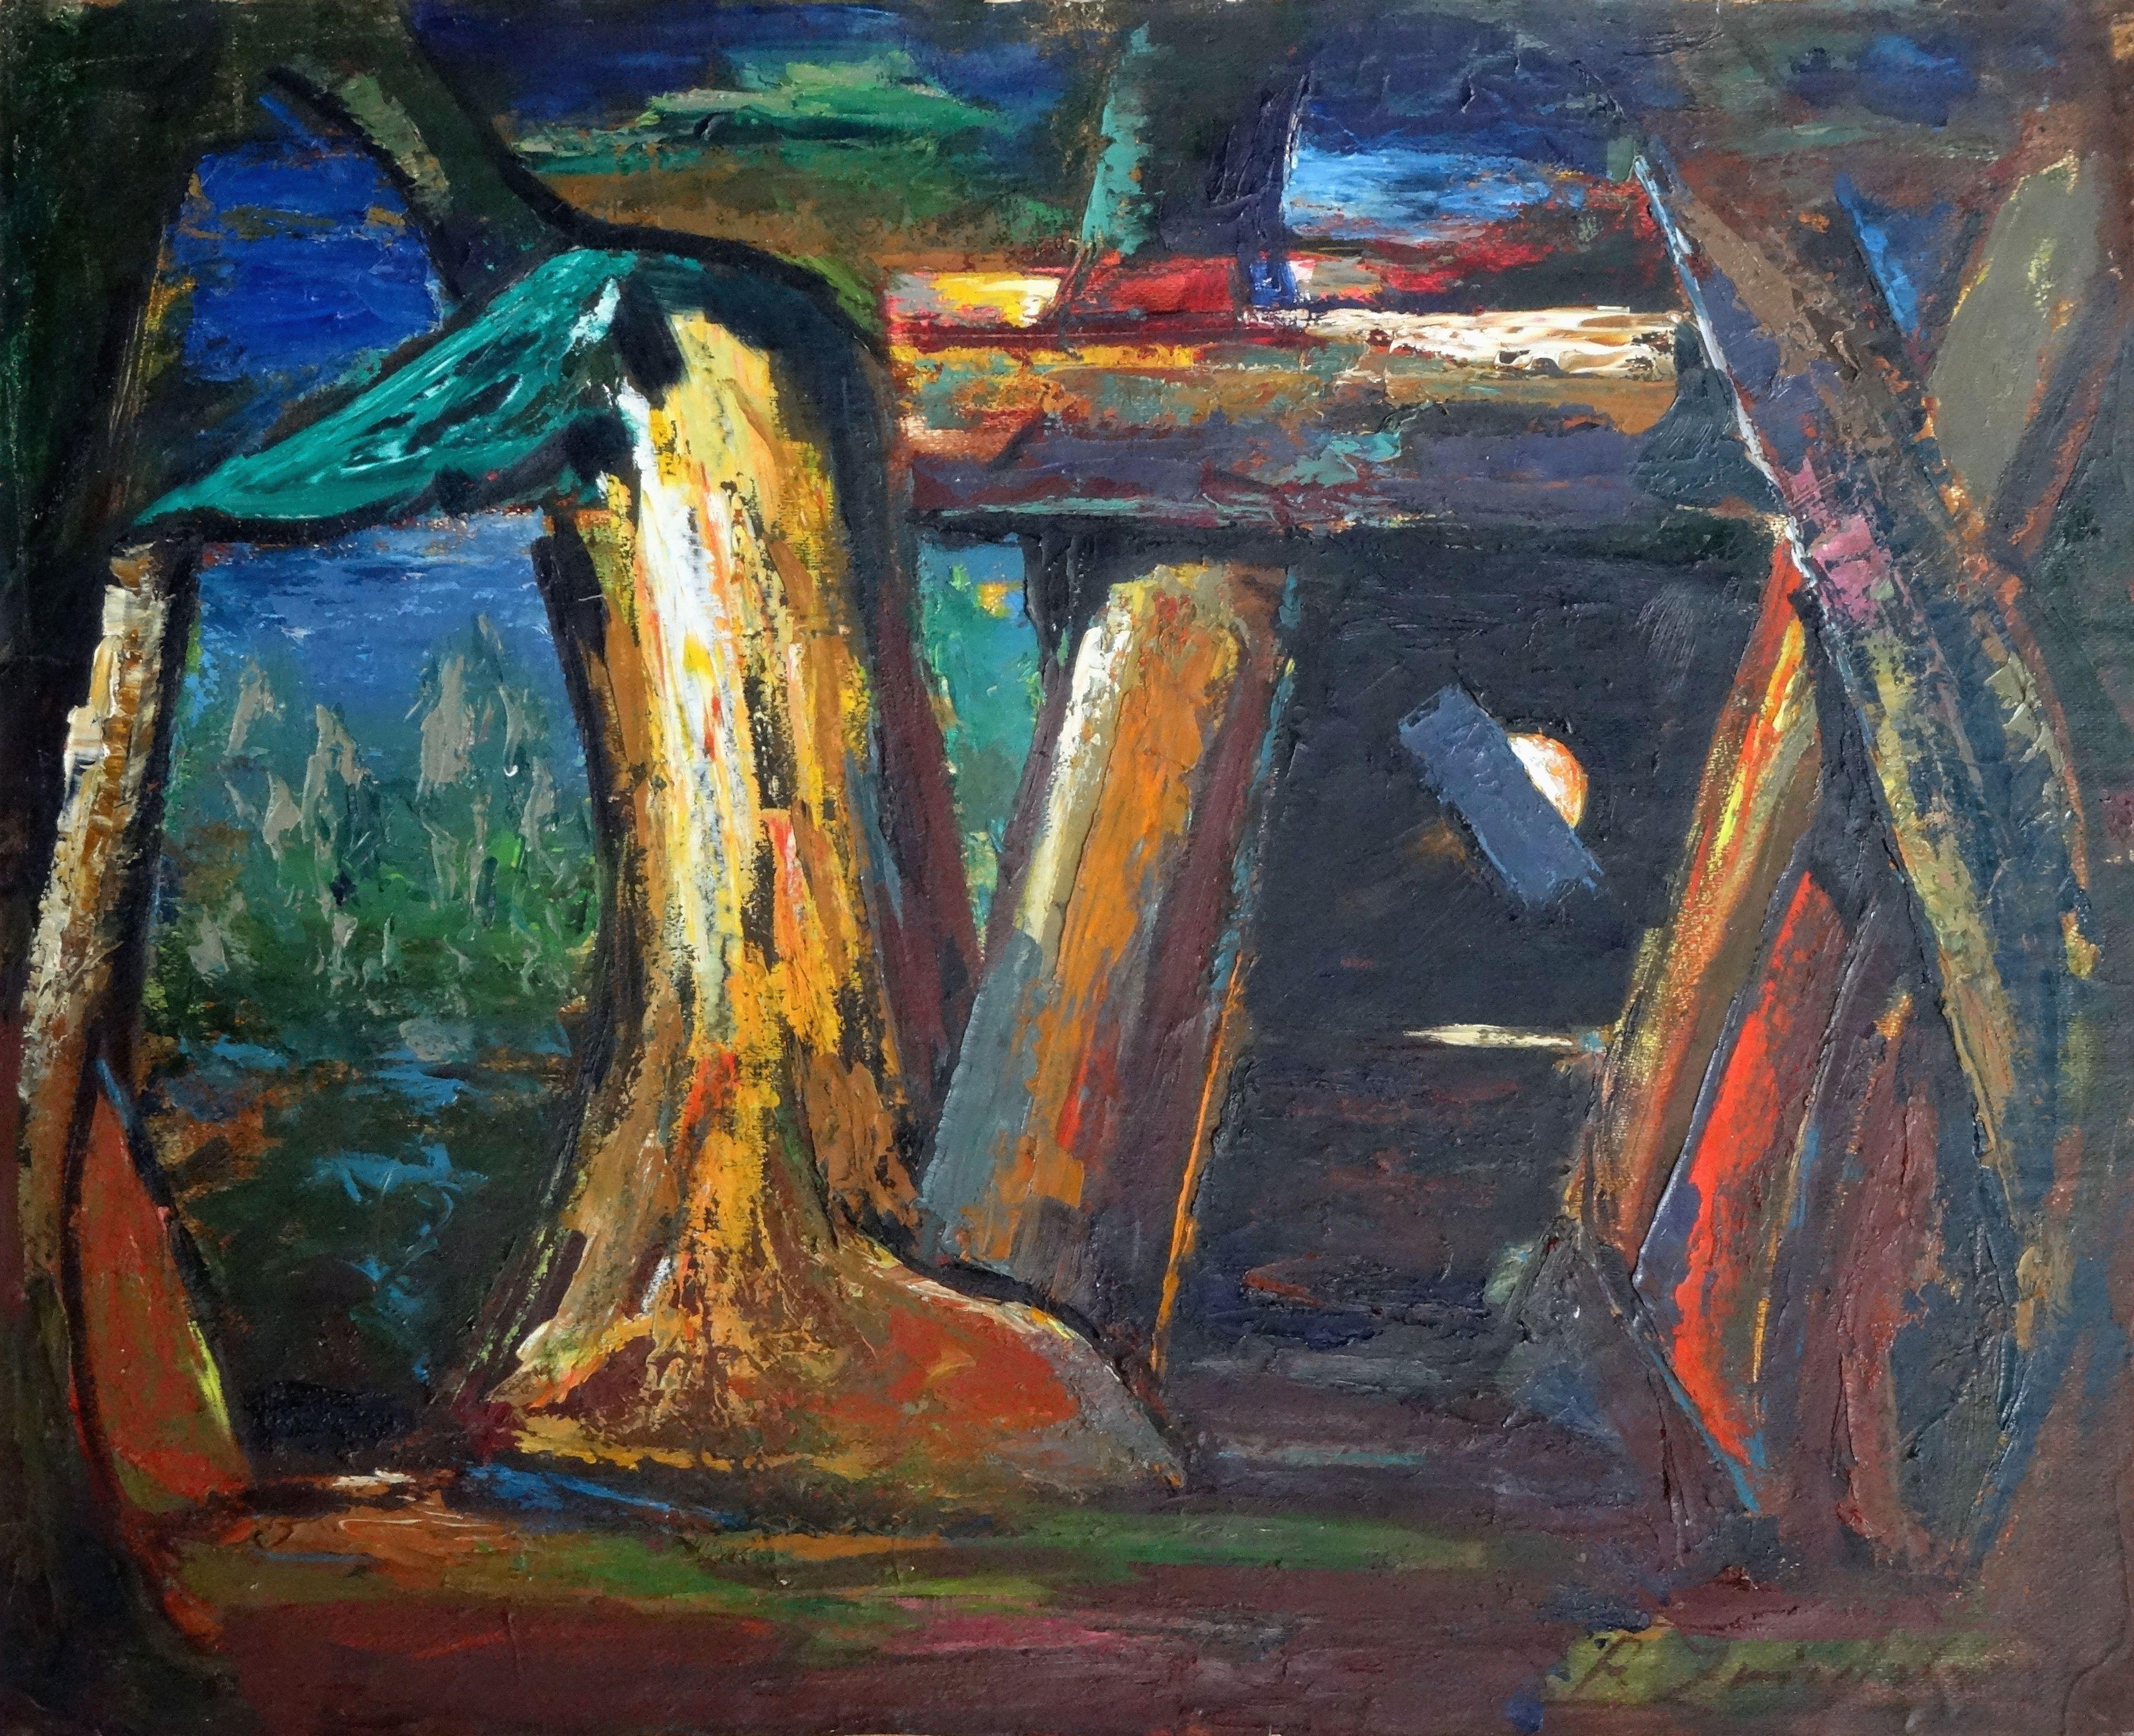 Fire and night, 1971. Oil on cardboard, 81x100 cm